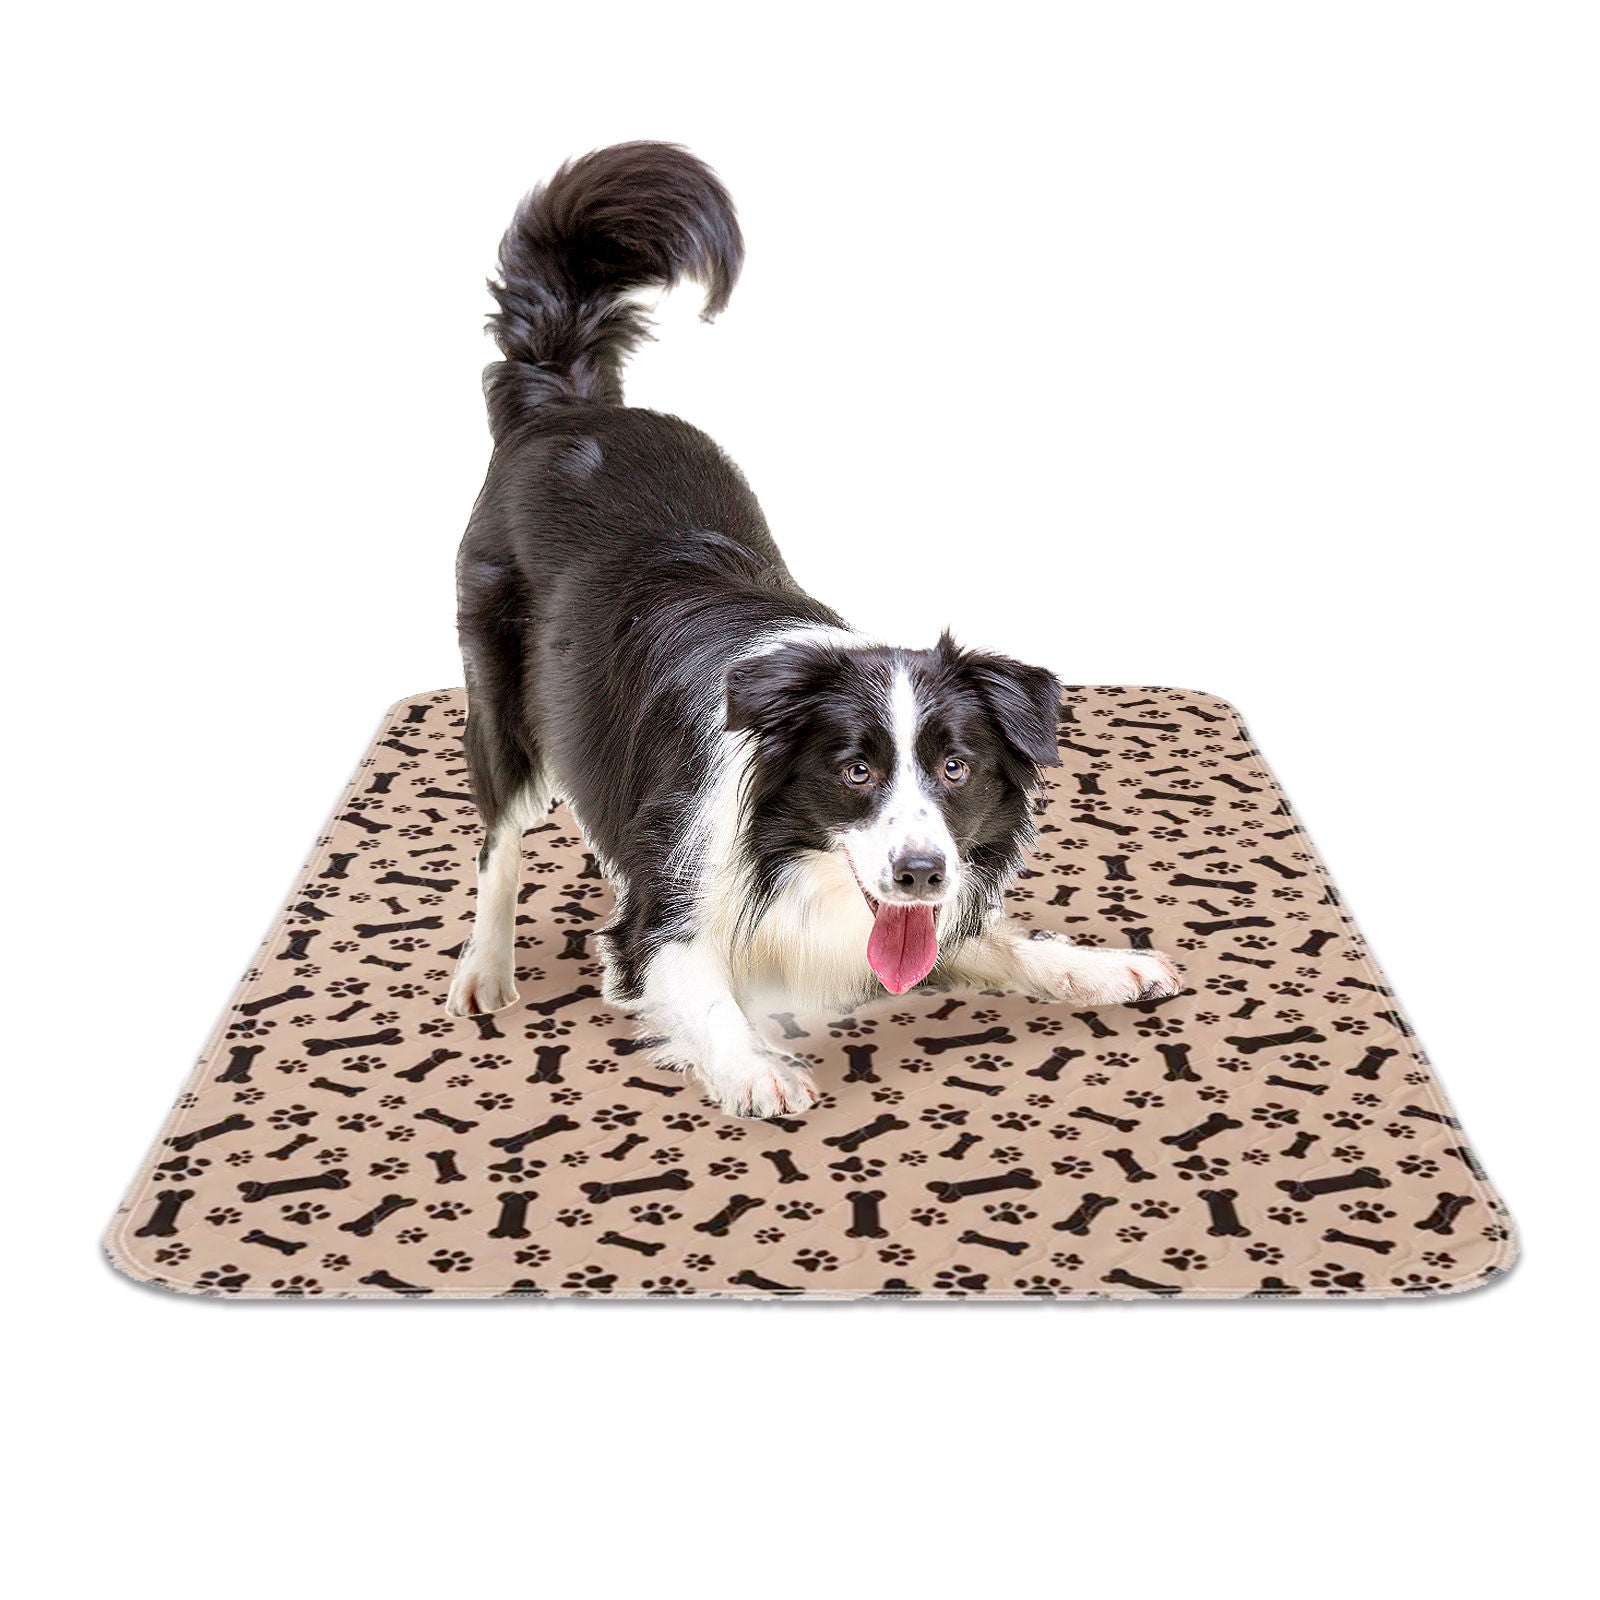 Pawfriends Washable Pet Dog Pee Pad Reusable Cat Puppy Training Wee Absorbent Mat Bed 80x90